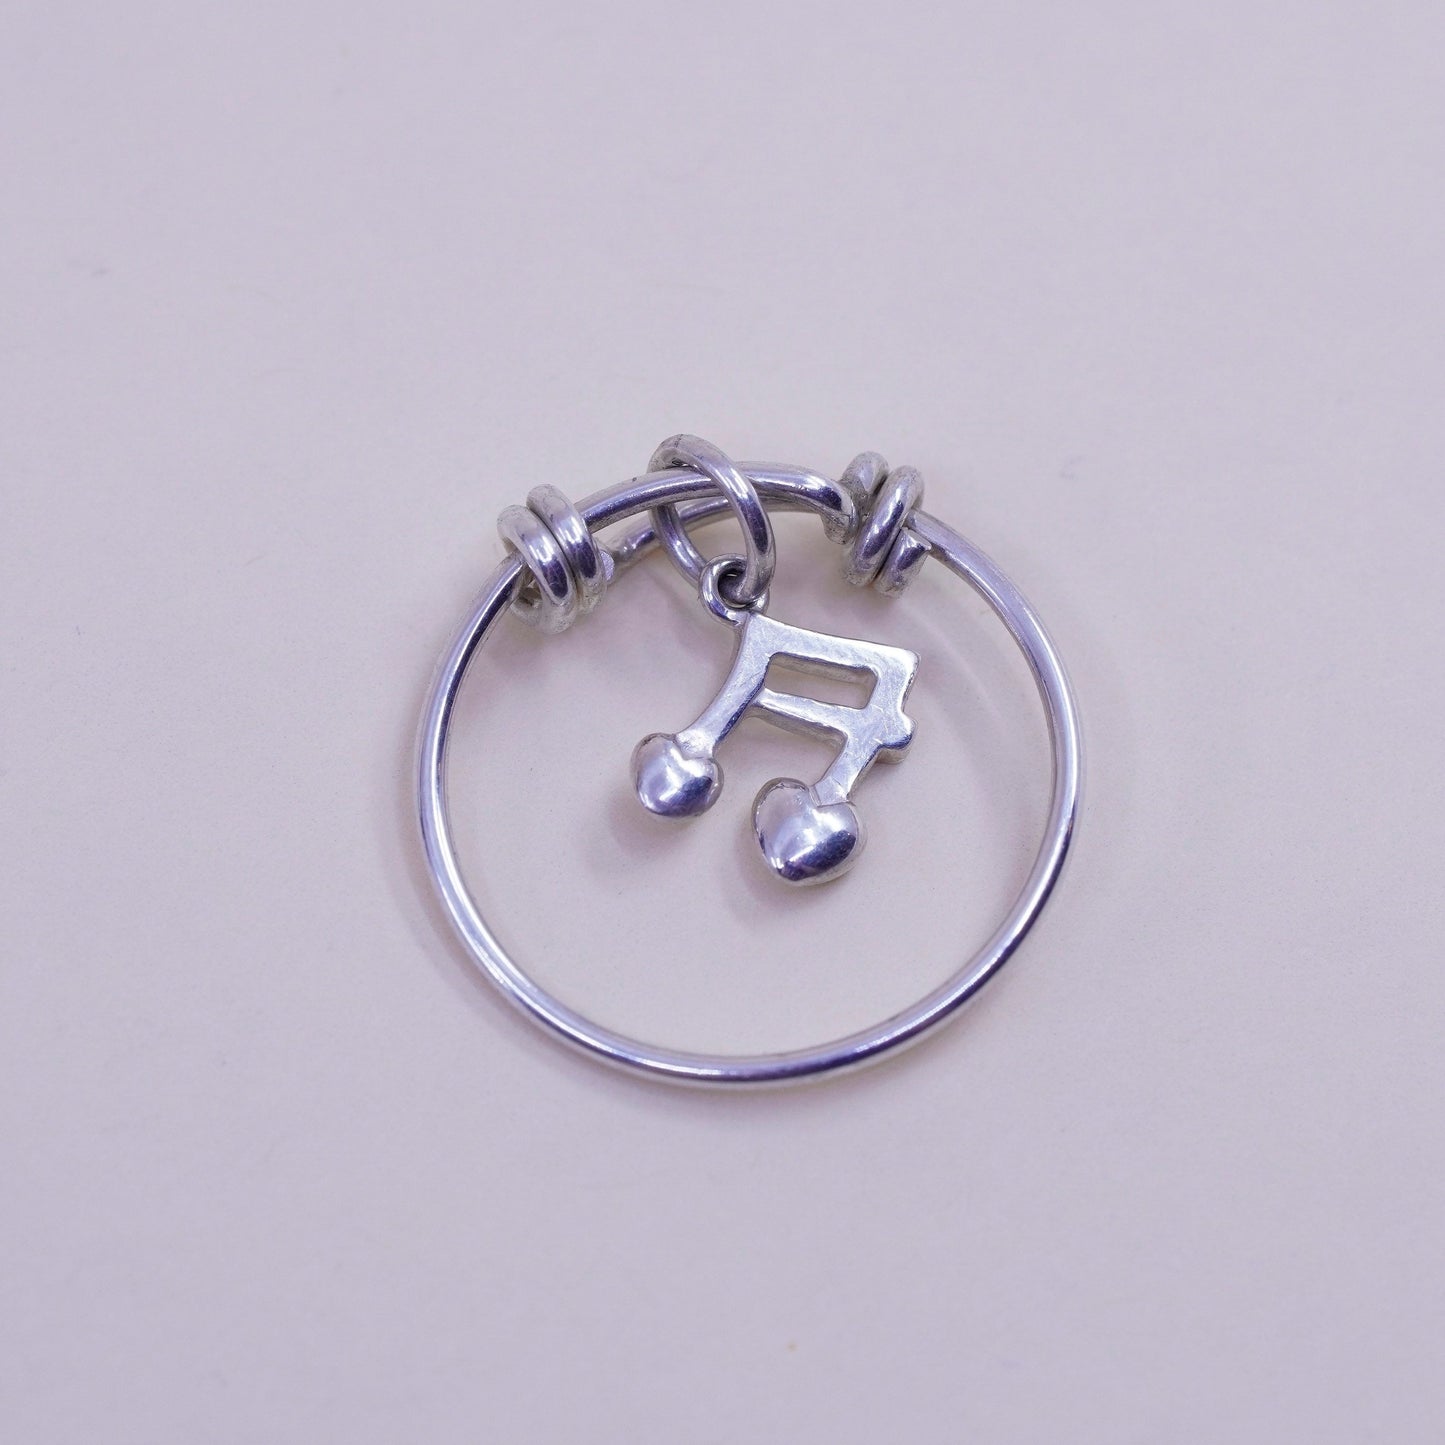 Size adjustable, vintage sterling silver handmade ring with music symbol